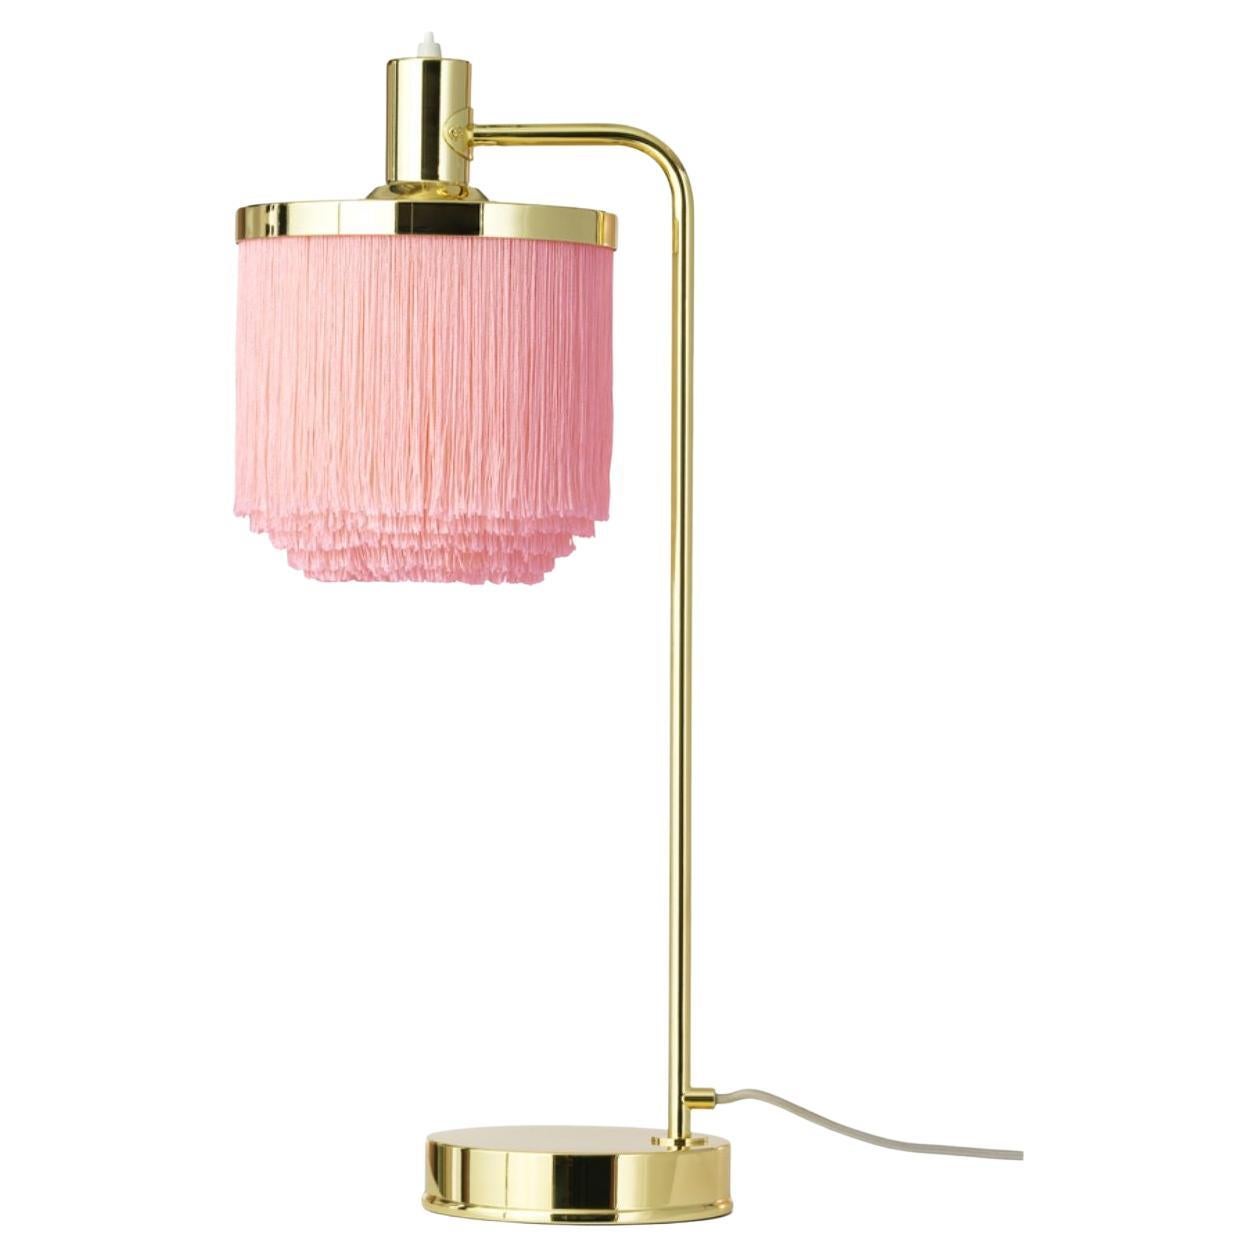 Fringe Pale Pink Table Lamp by Warm Nordic